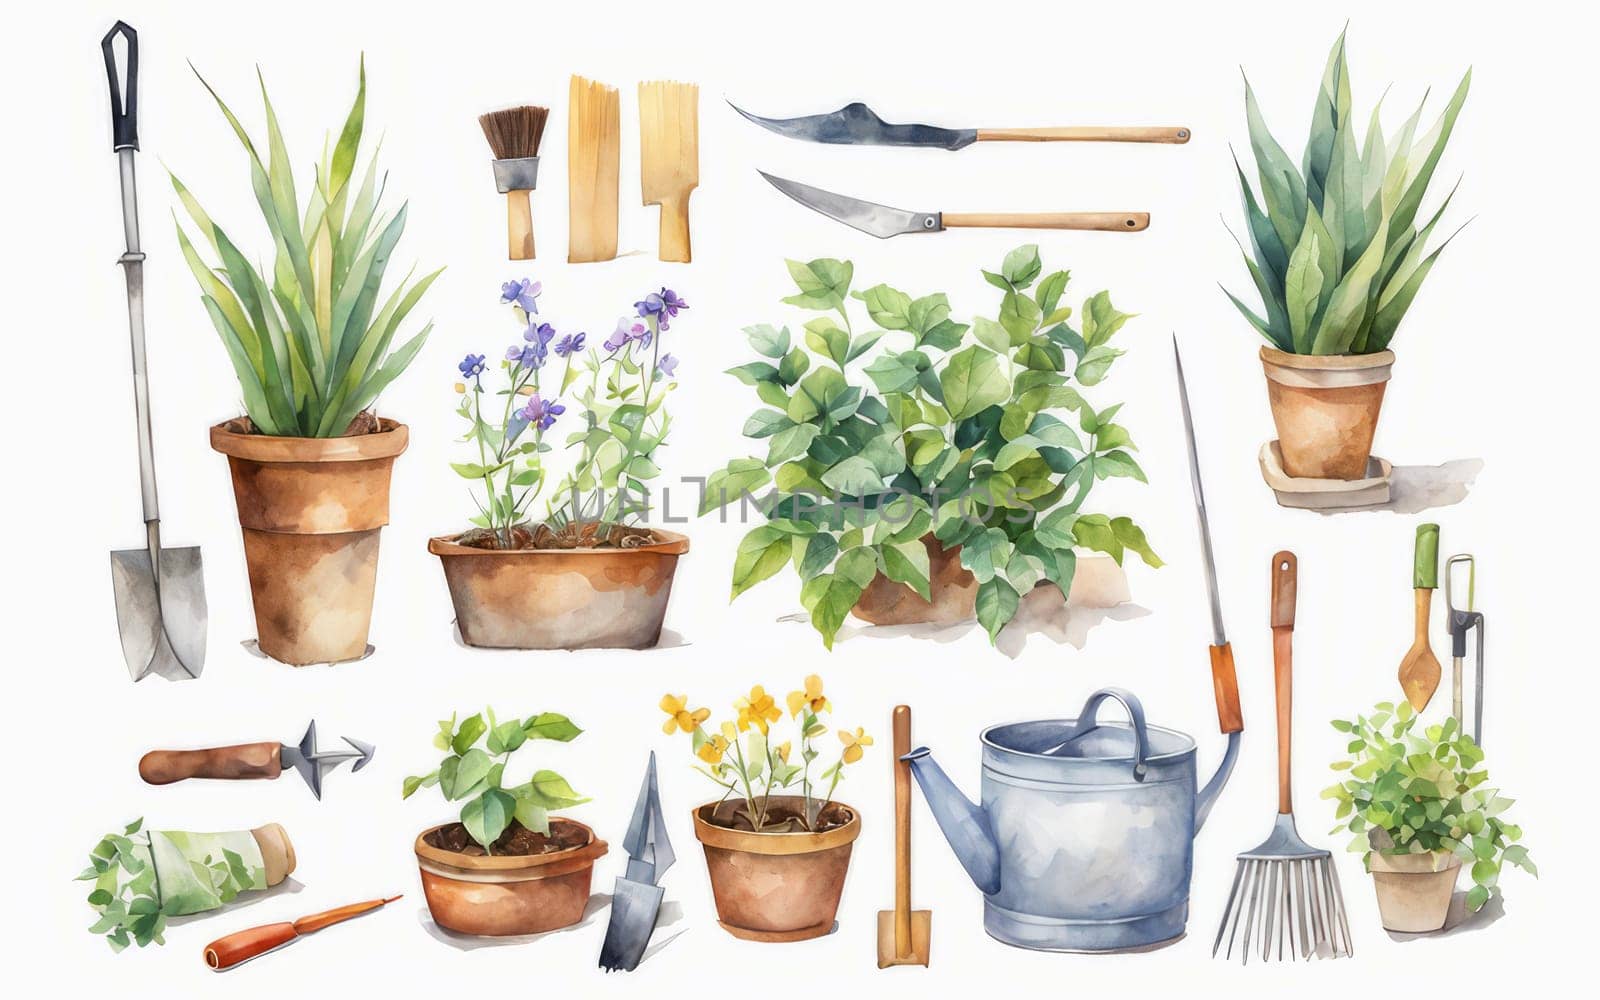 Artistic watercolor depiction of garden essentials, bringing to life the concept of gardening through a creative and visually appealing composition